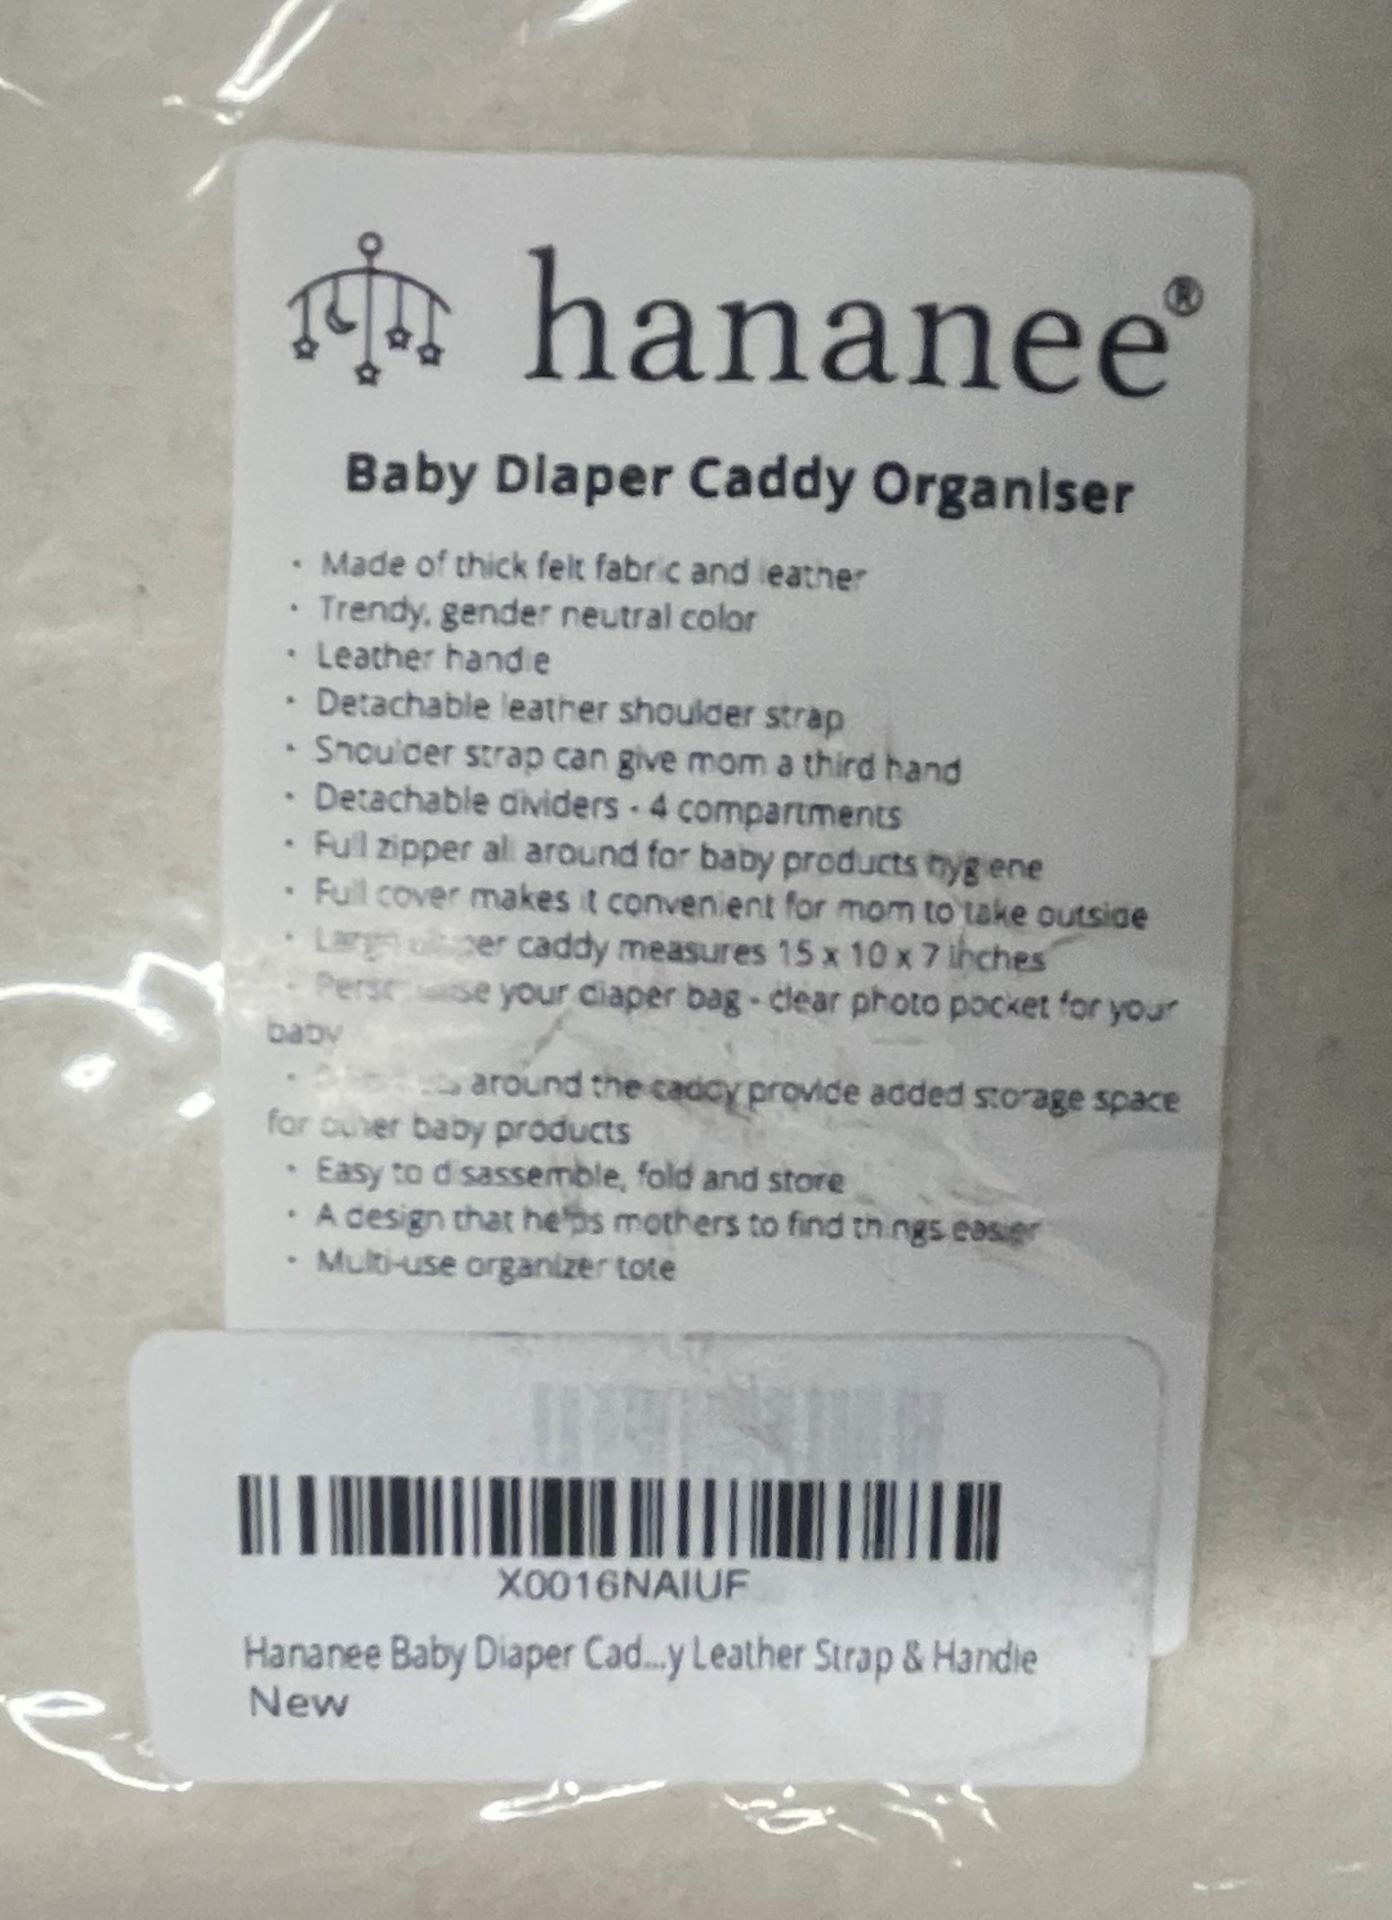 6 x Hananee Baby Diaper Caddy Organisers - New in Packets - Image 4 of 5